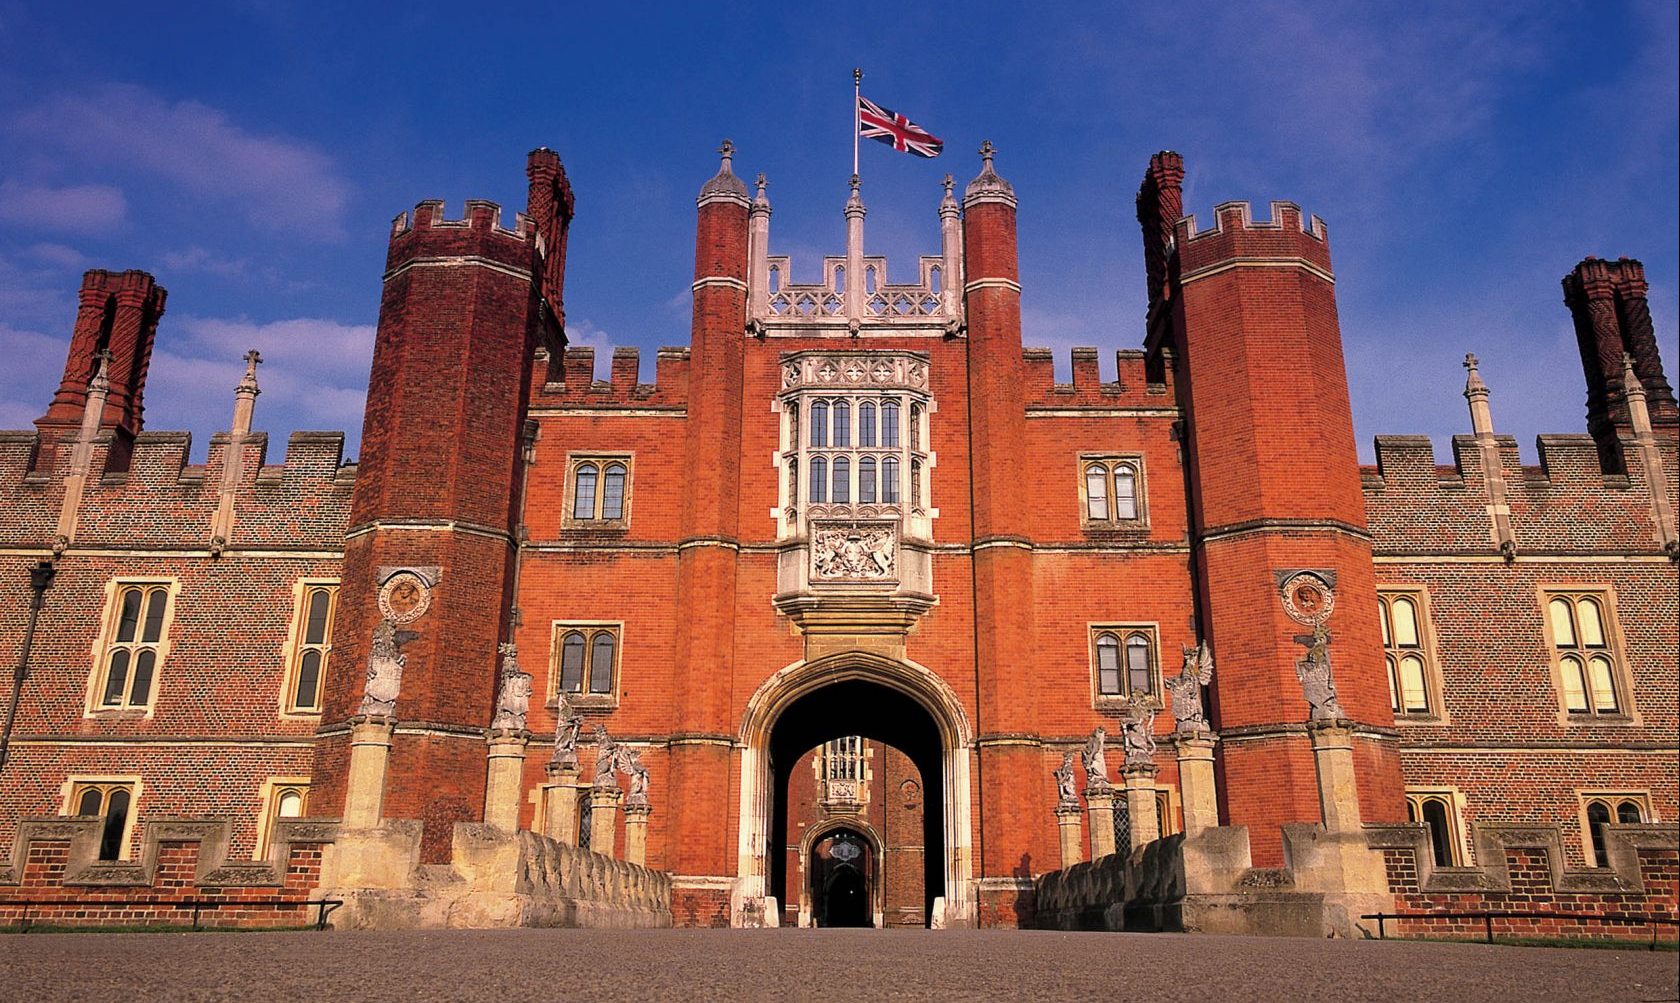 Hampton Court Palace - The bridge over the moat leads to the Tudor west front, which is protected by the King's Beasts.